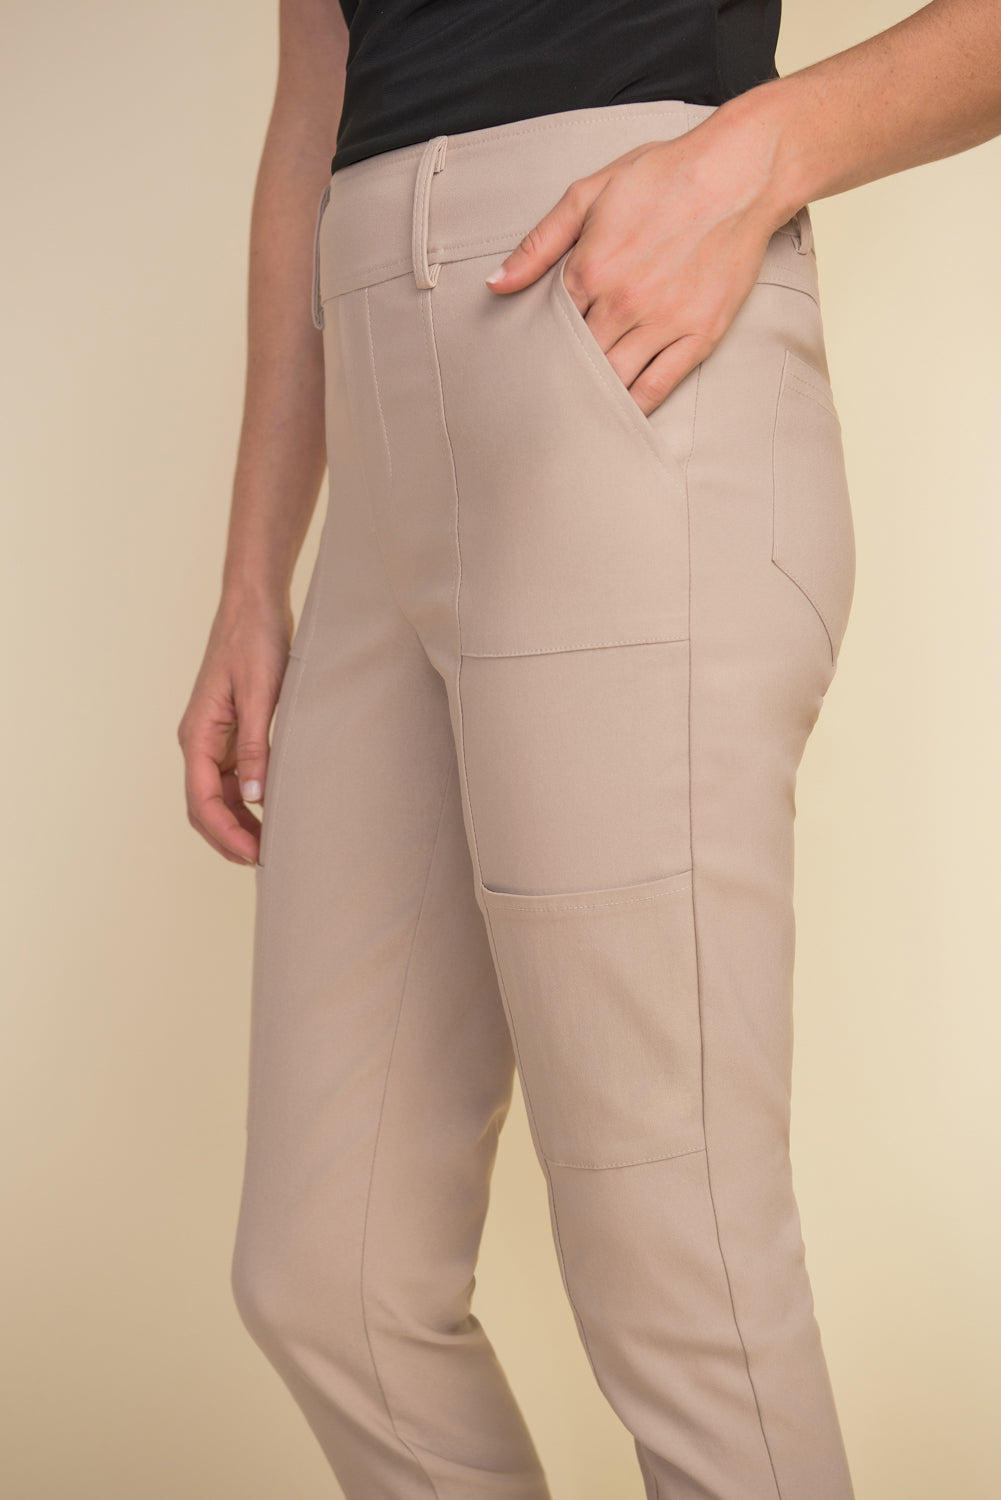 ARS Commuter Pants in MOONSTONE